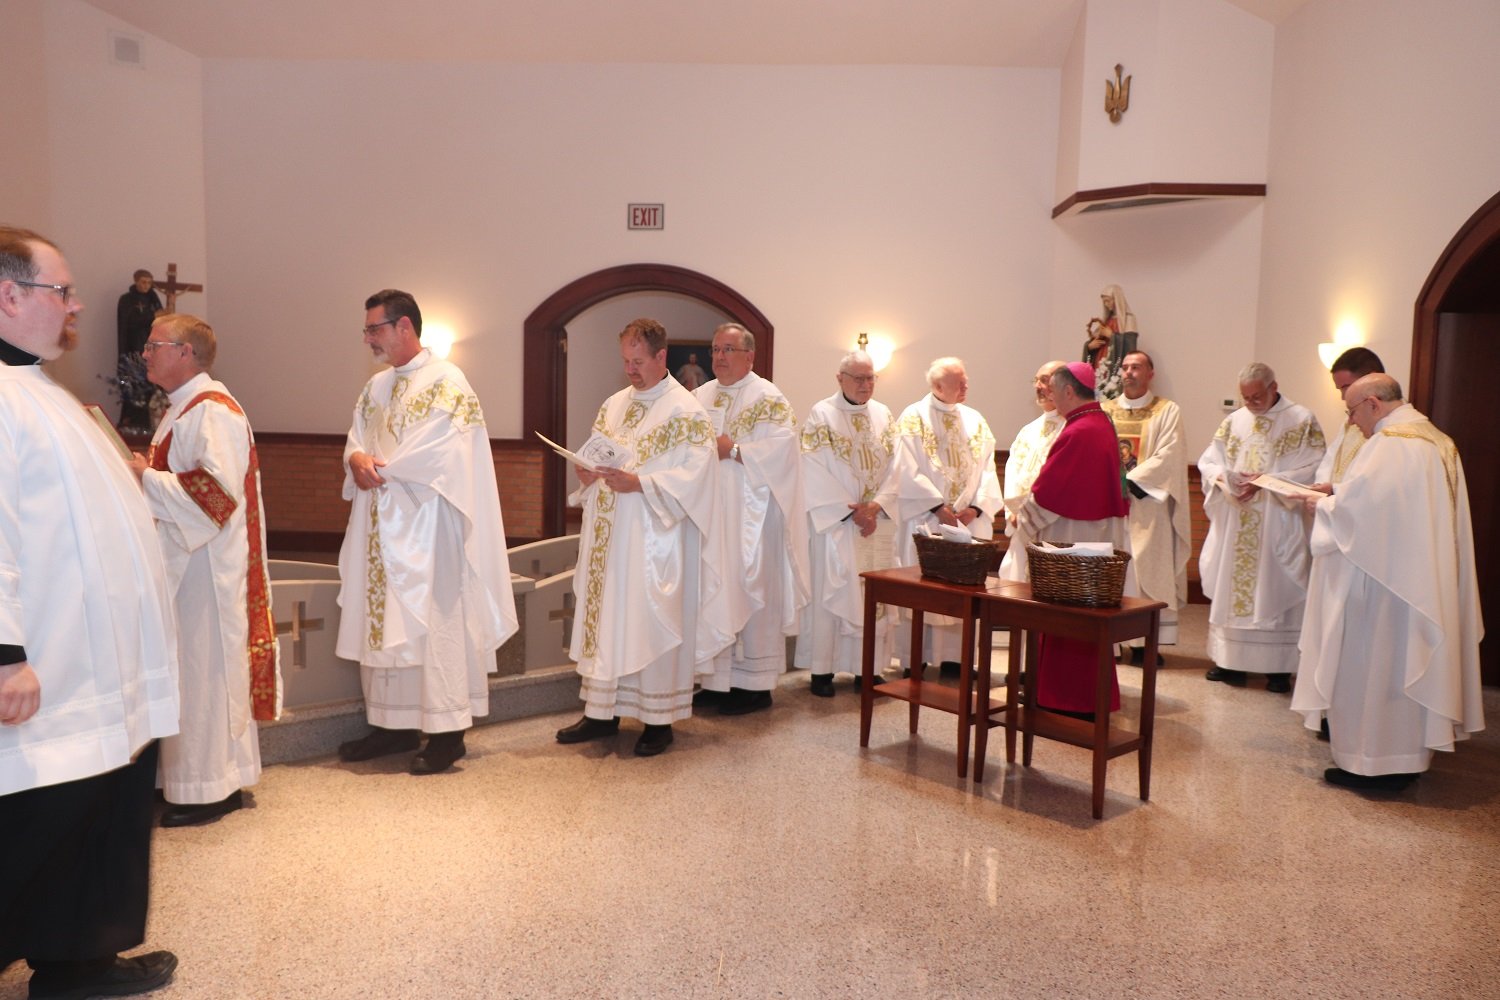  It was a joy to welcome so many of our priest and deacon friends to the Mass!  L-R: Transitional Dcn Chris Kight (Master of Ceremonies), permanent Dcn Bruce Sullivan, Msgr. Paul Hudock, Fr. Jason Gries, Fr. David Wilton CPM, Fr. Richard Powers, Fr J